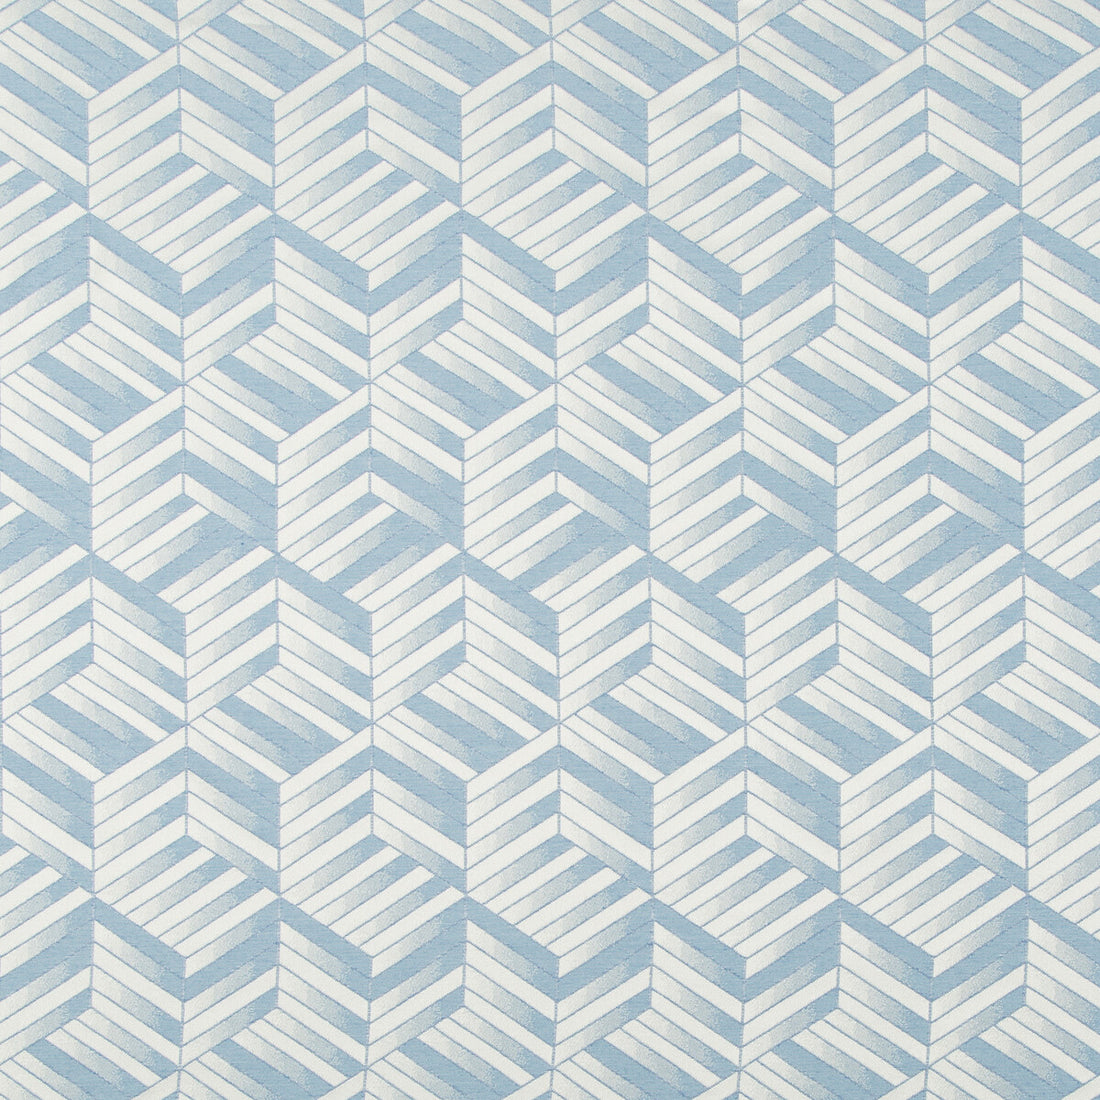 Wayfarer fabric in atlantis color - pattern 4799.15.0 - by Kravet Contract in the Kravet Cruise collection